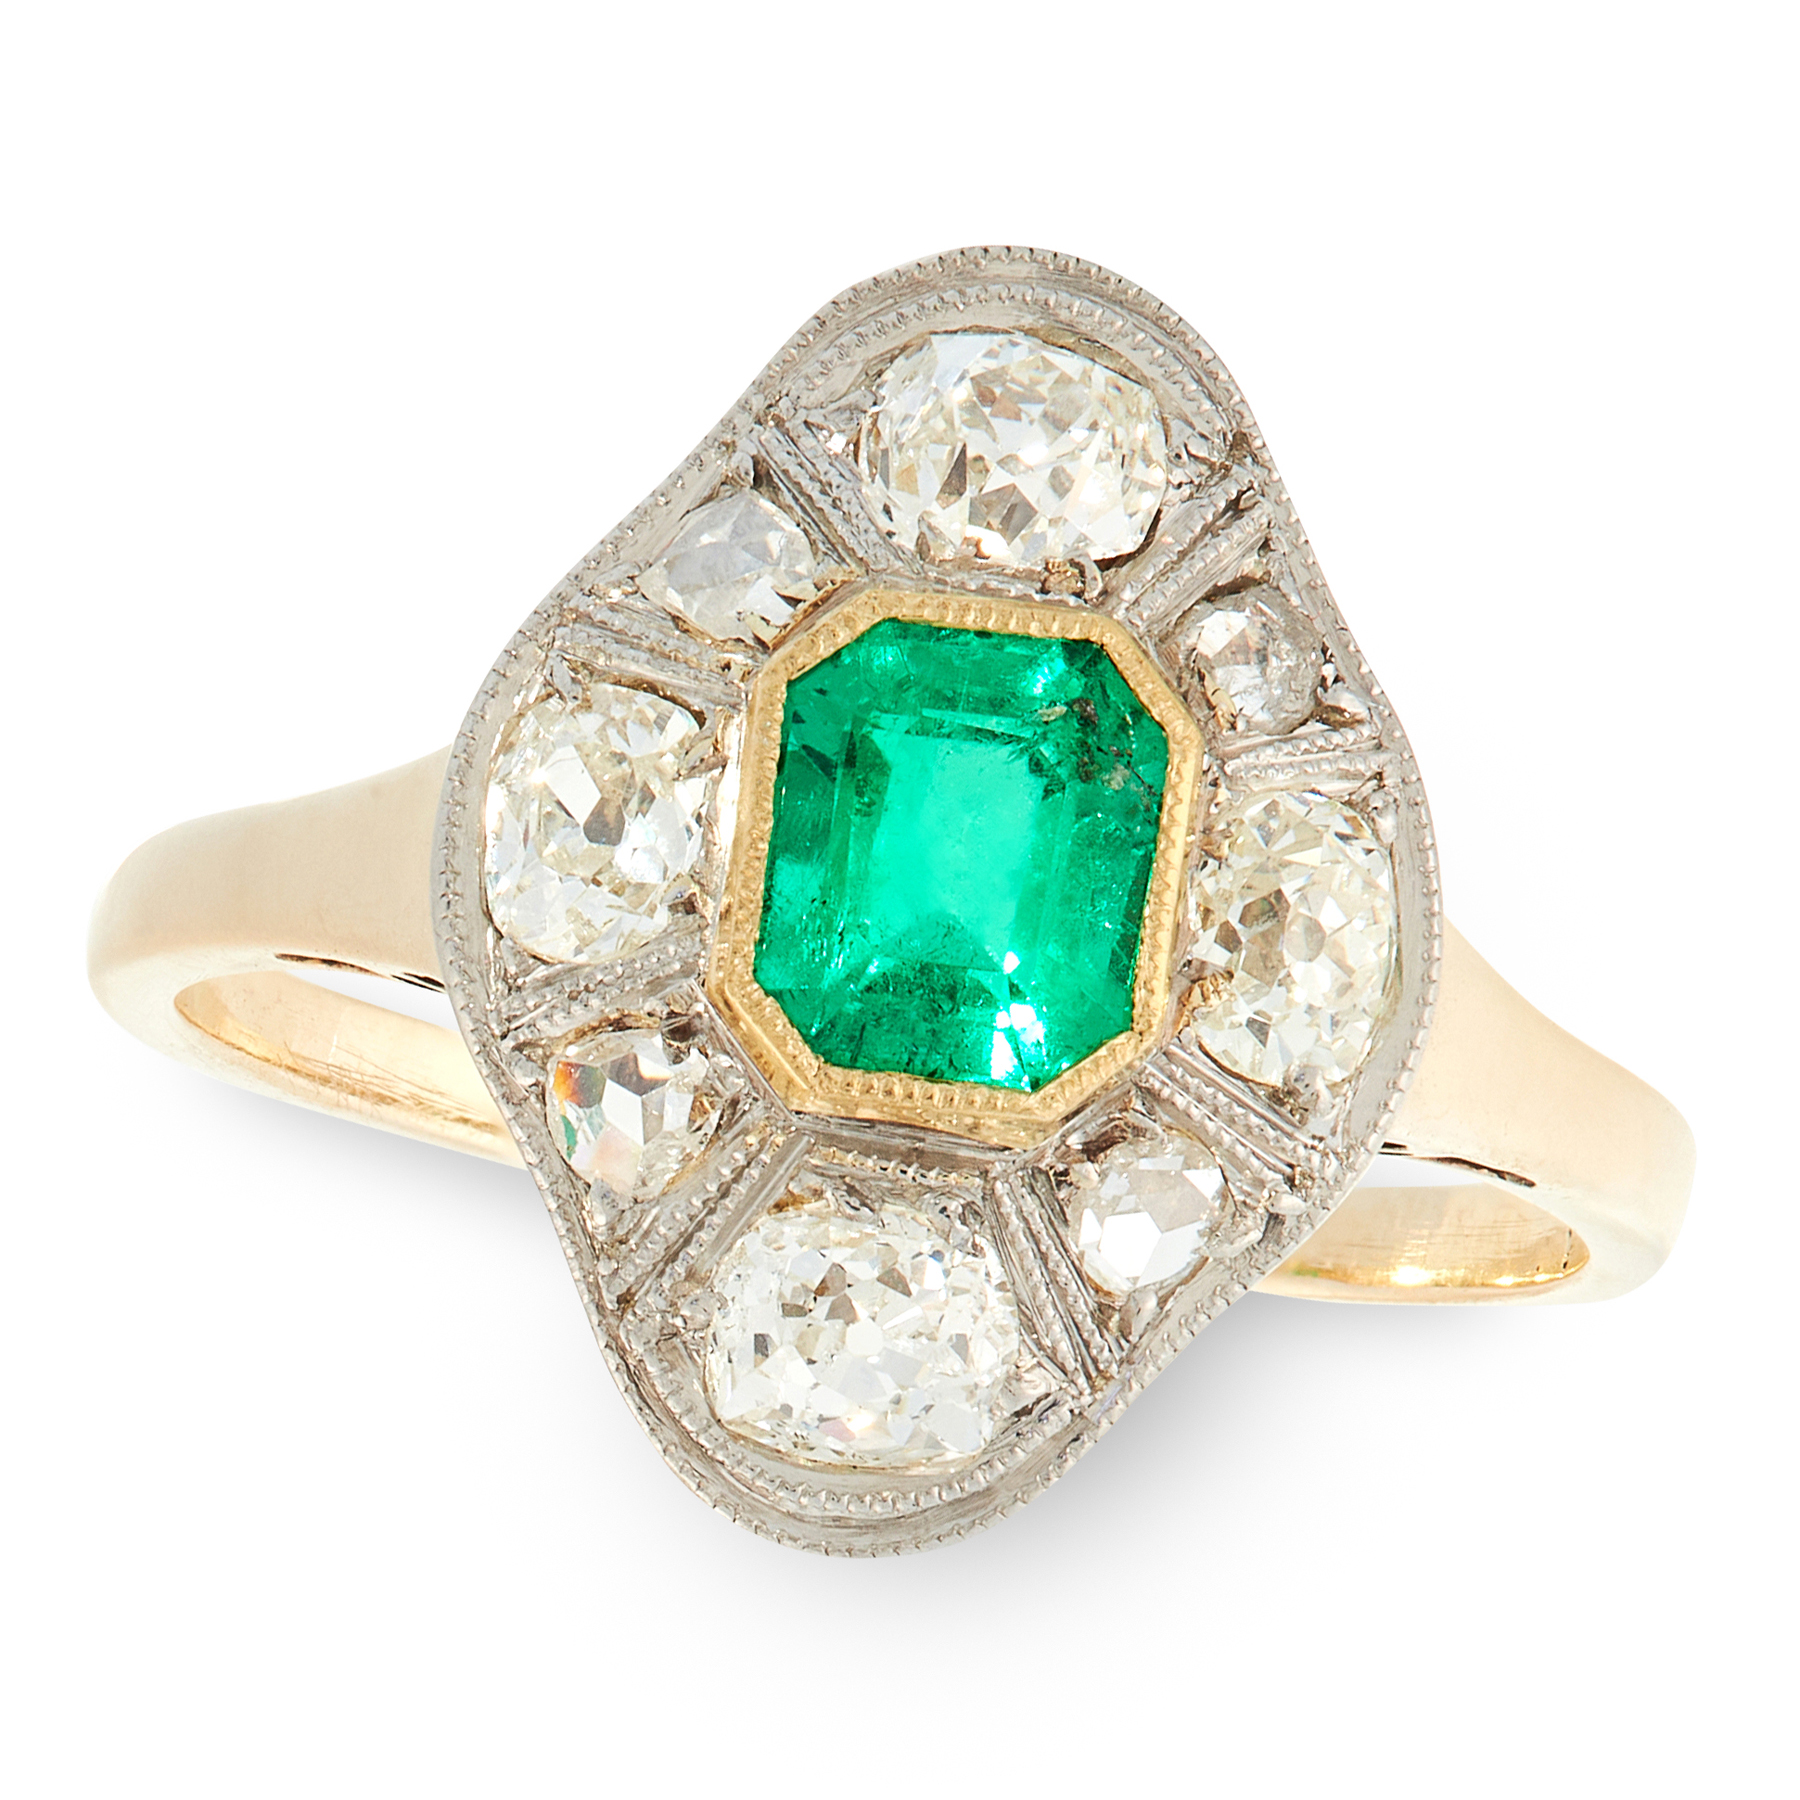 A COLOMBIAN EMERALD AND DIAMOND RING, CIRCA 1930 in 14ct yellow gold, set with an emerald cut - Image 2 of 2